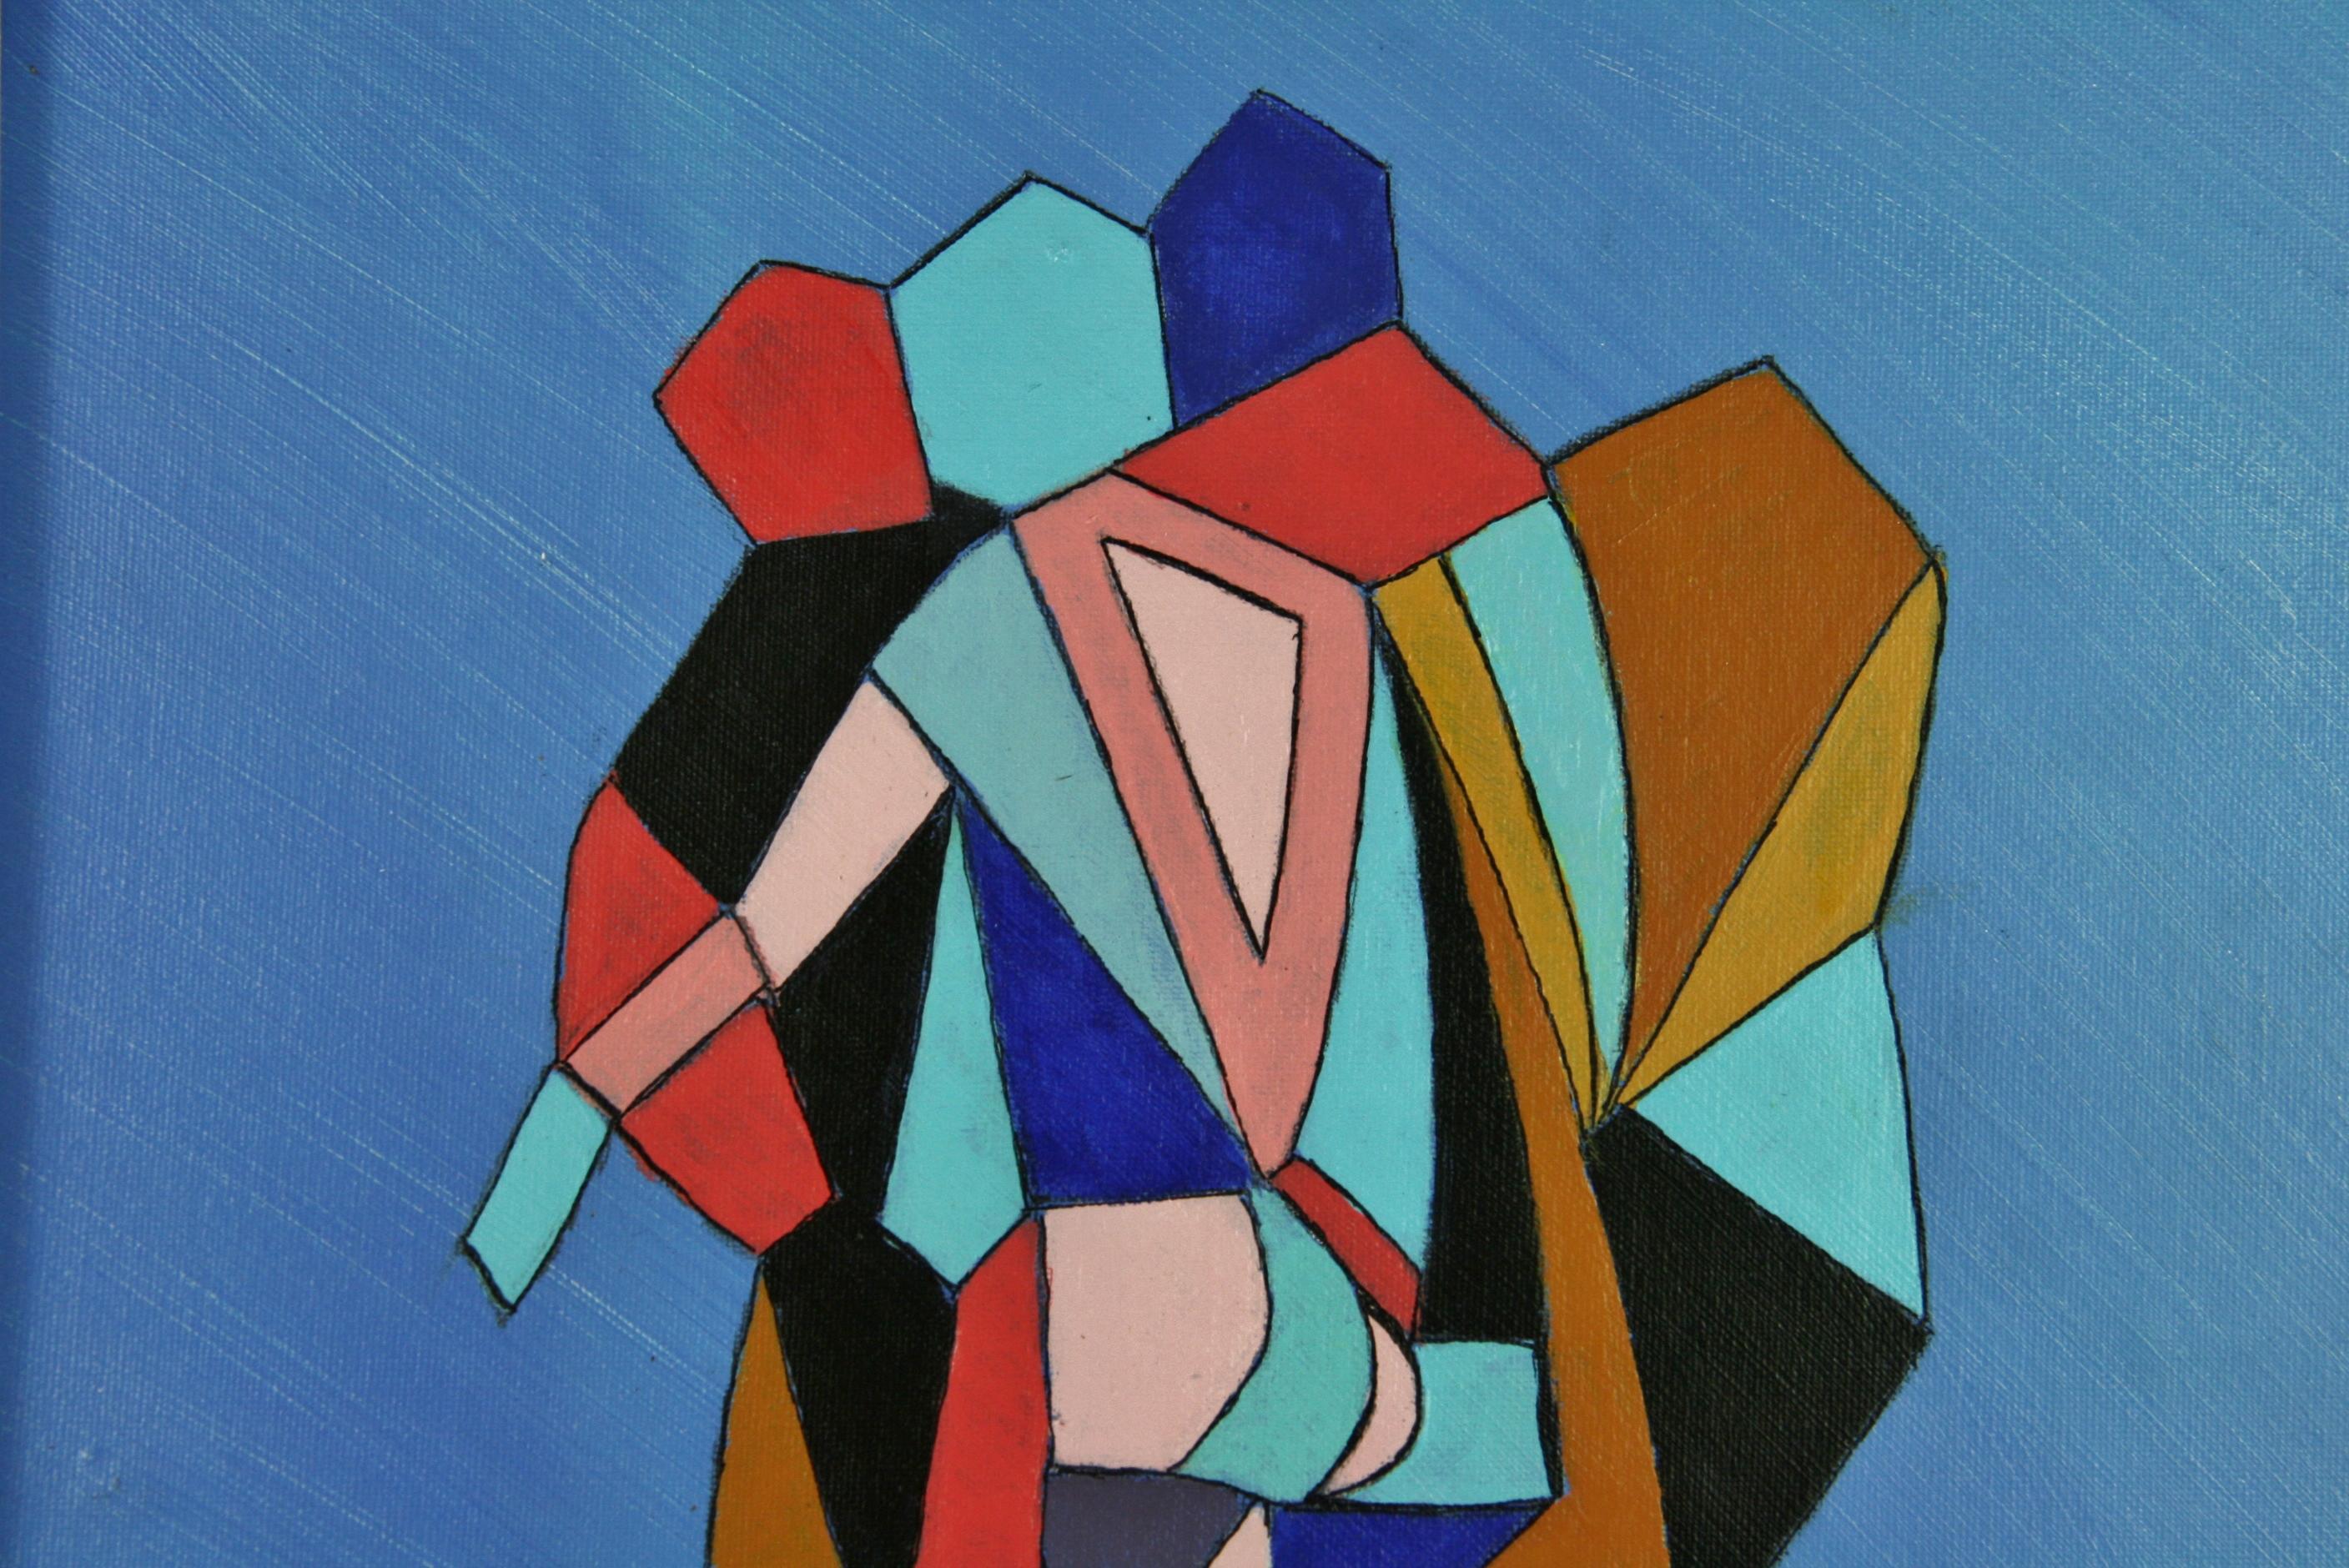 European Modern Danish Cubic Figural Acrylic Painting by Johnson 2015 For Sale